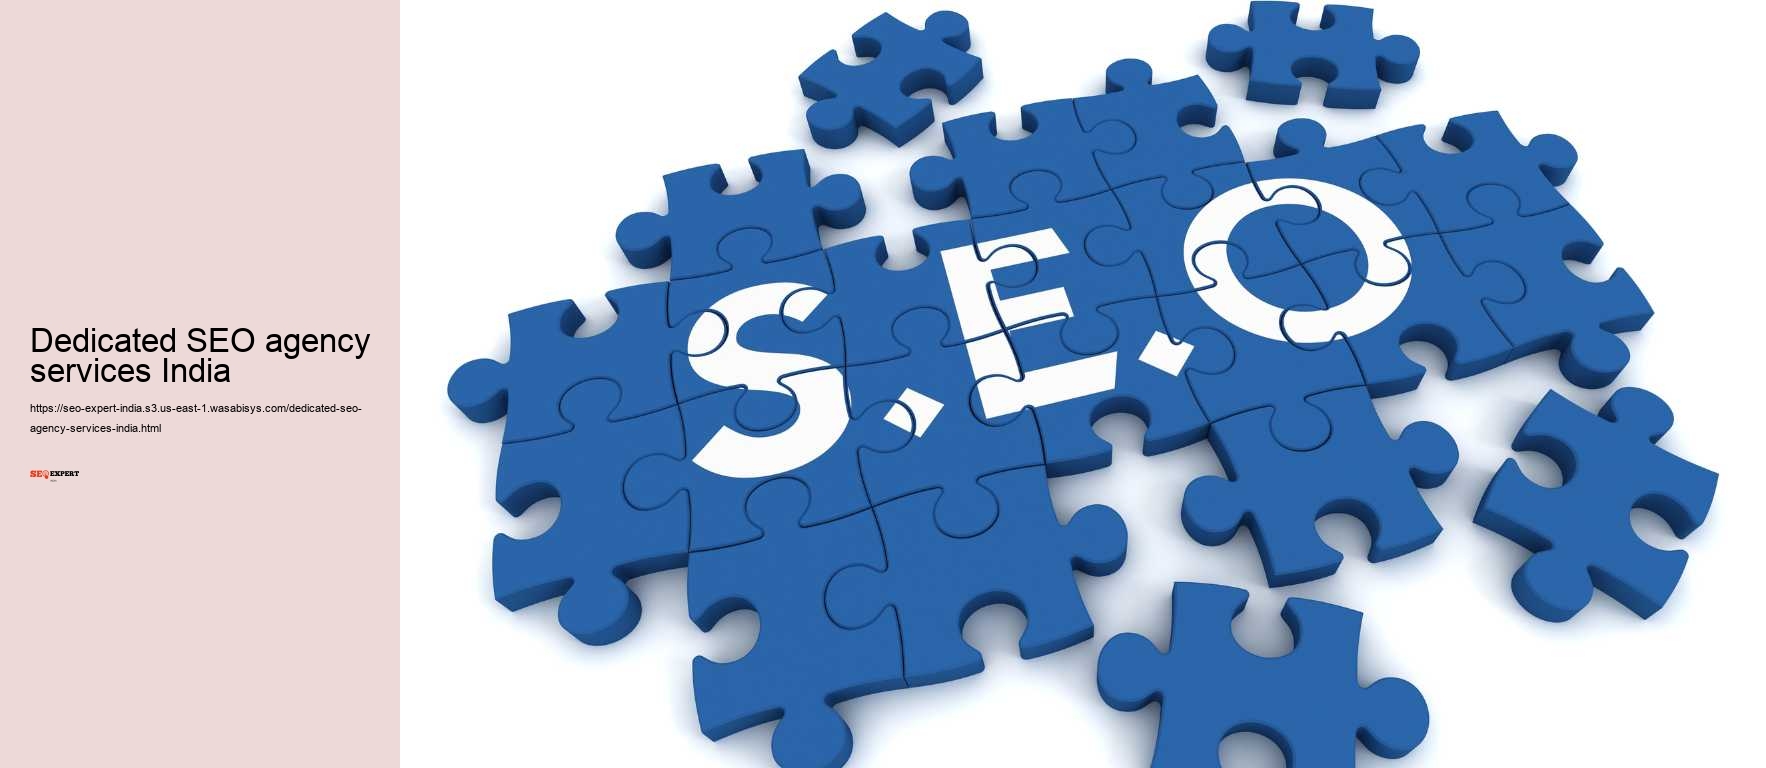 Dedicated SEO agency services India